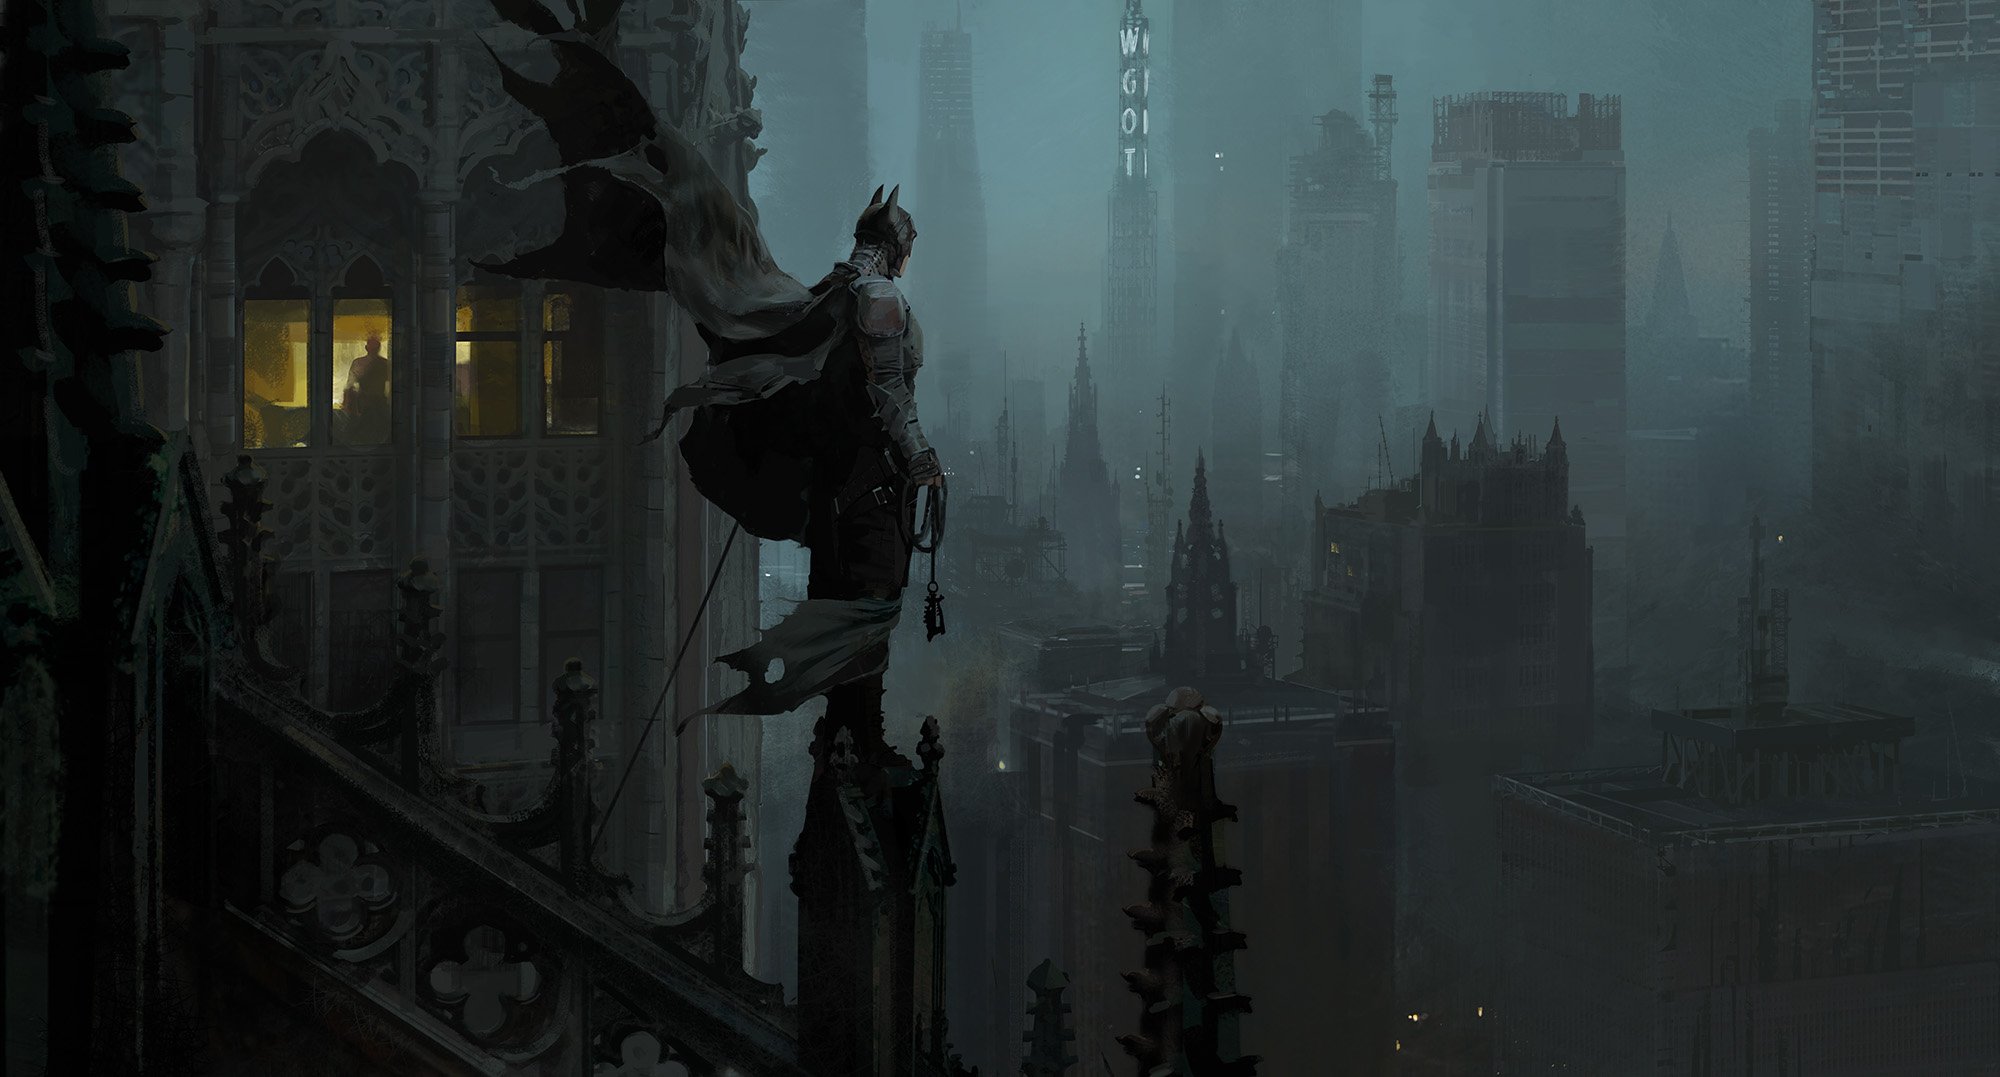 batman standing moodily on some gothic buttresses, staring at a smog-filled gotham